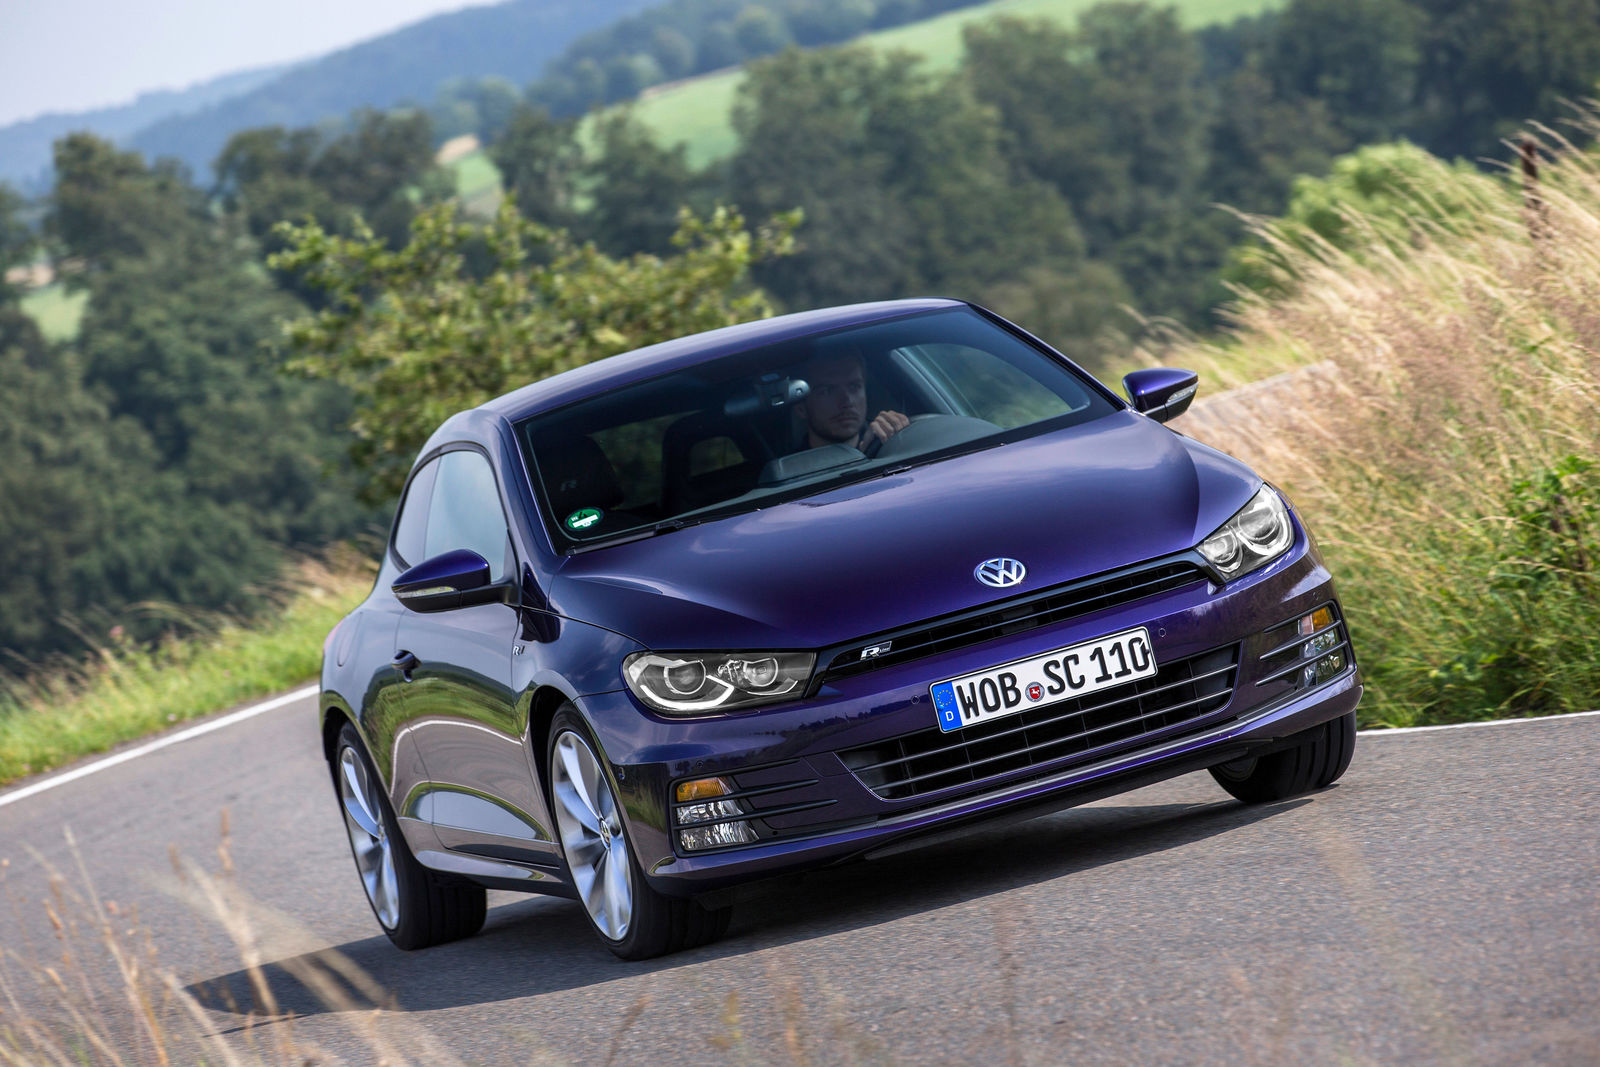 Volkswagen Scirocco with R-Line package